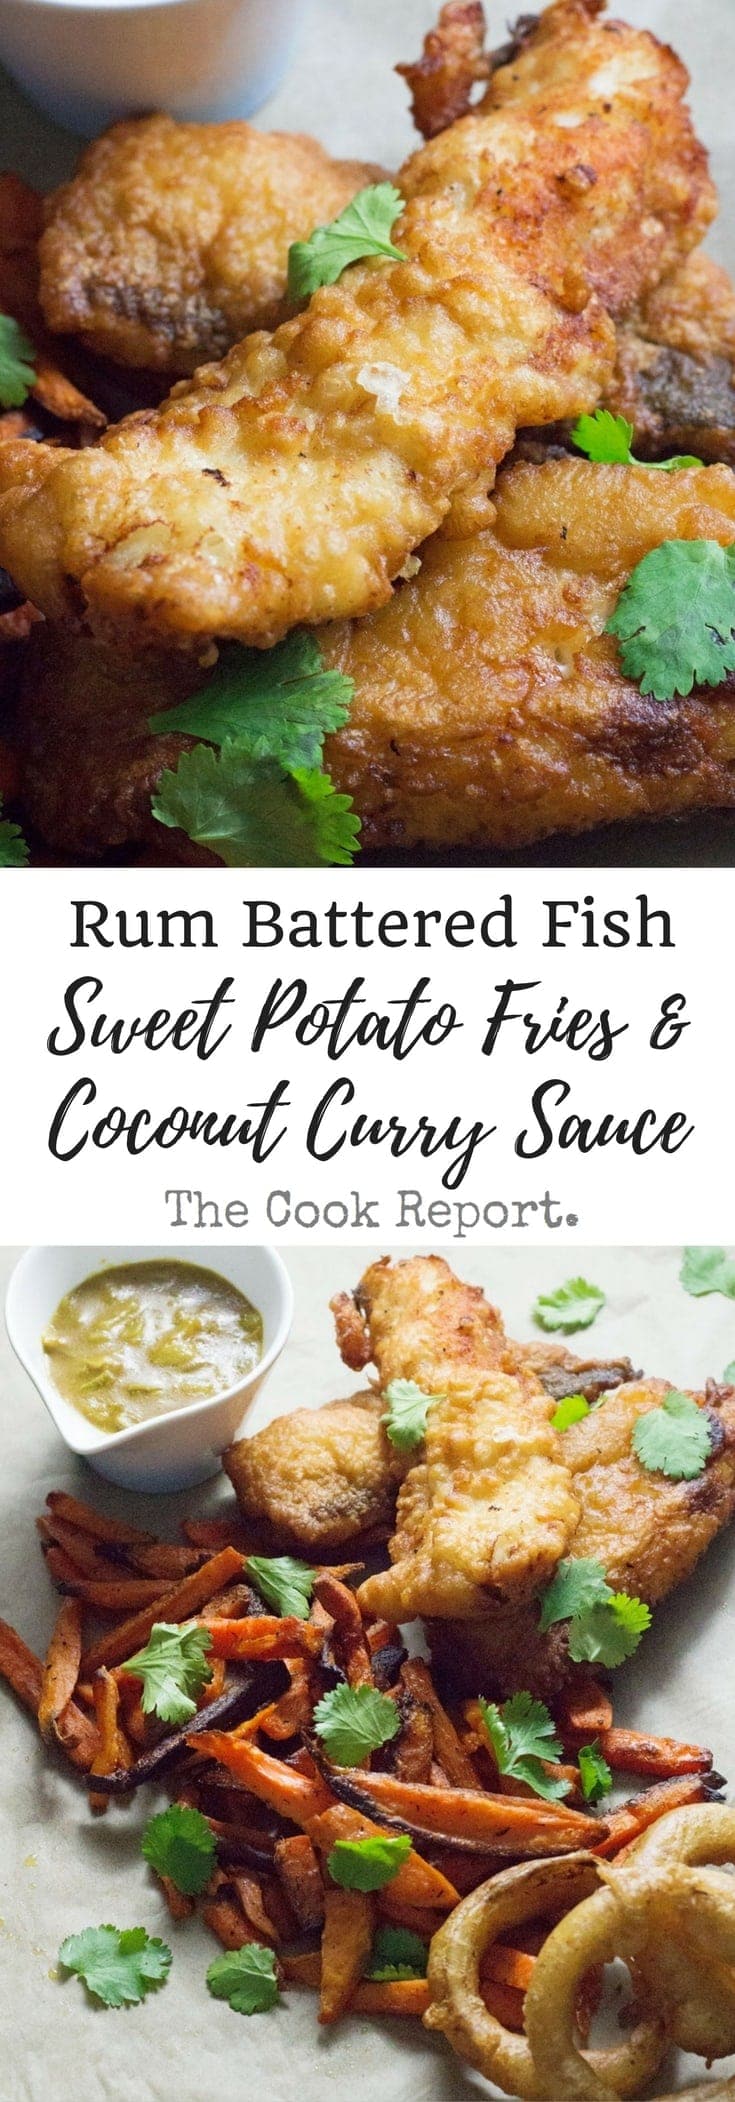 This Caribbean style fish and chips is made up of rum battered fish, sweet potato fries and an incredible coconut curry sauce!